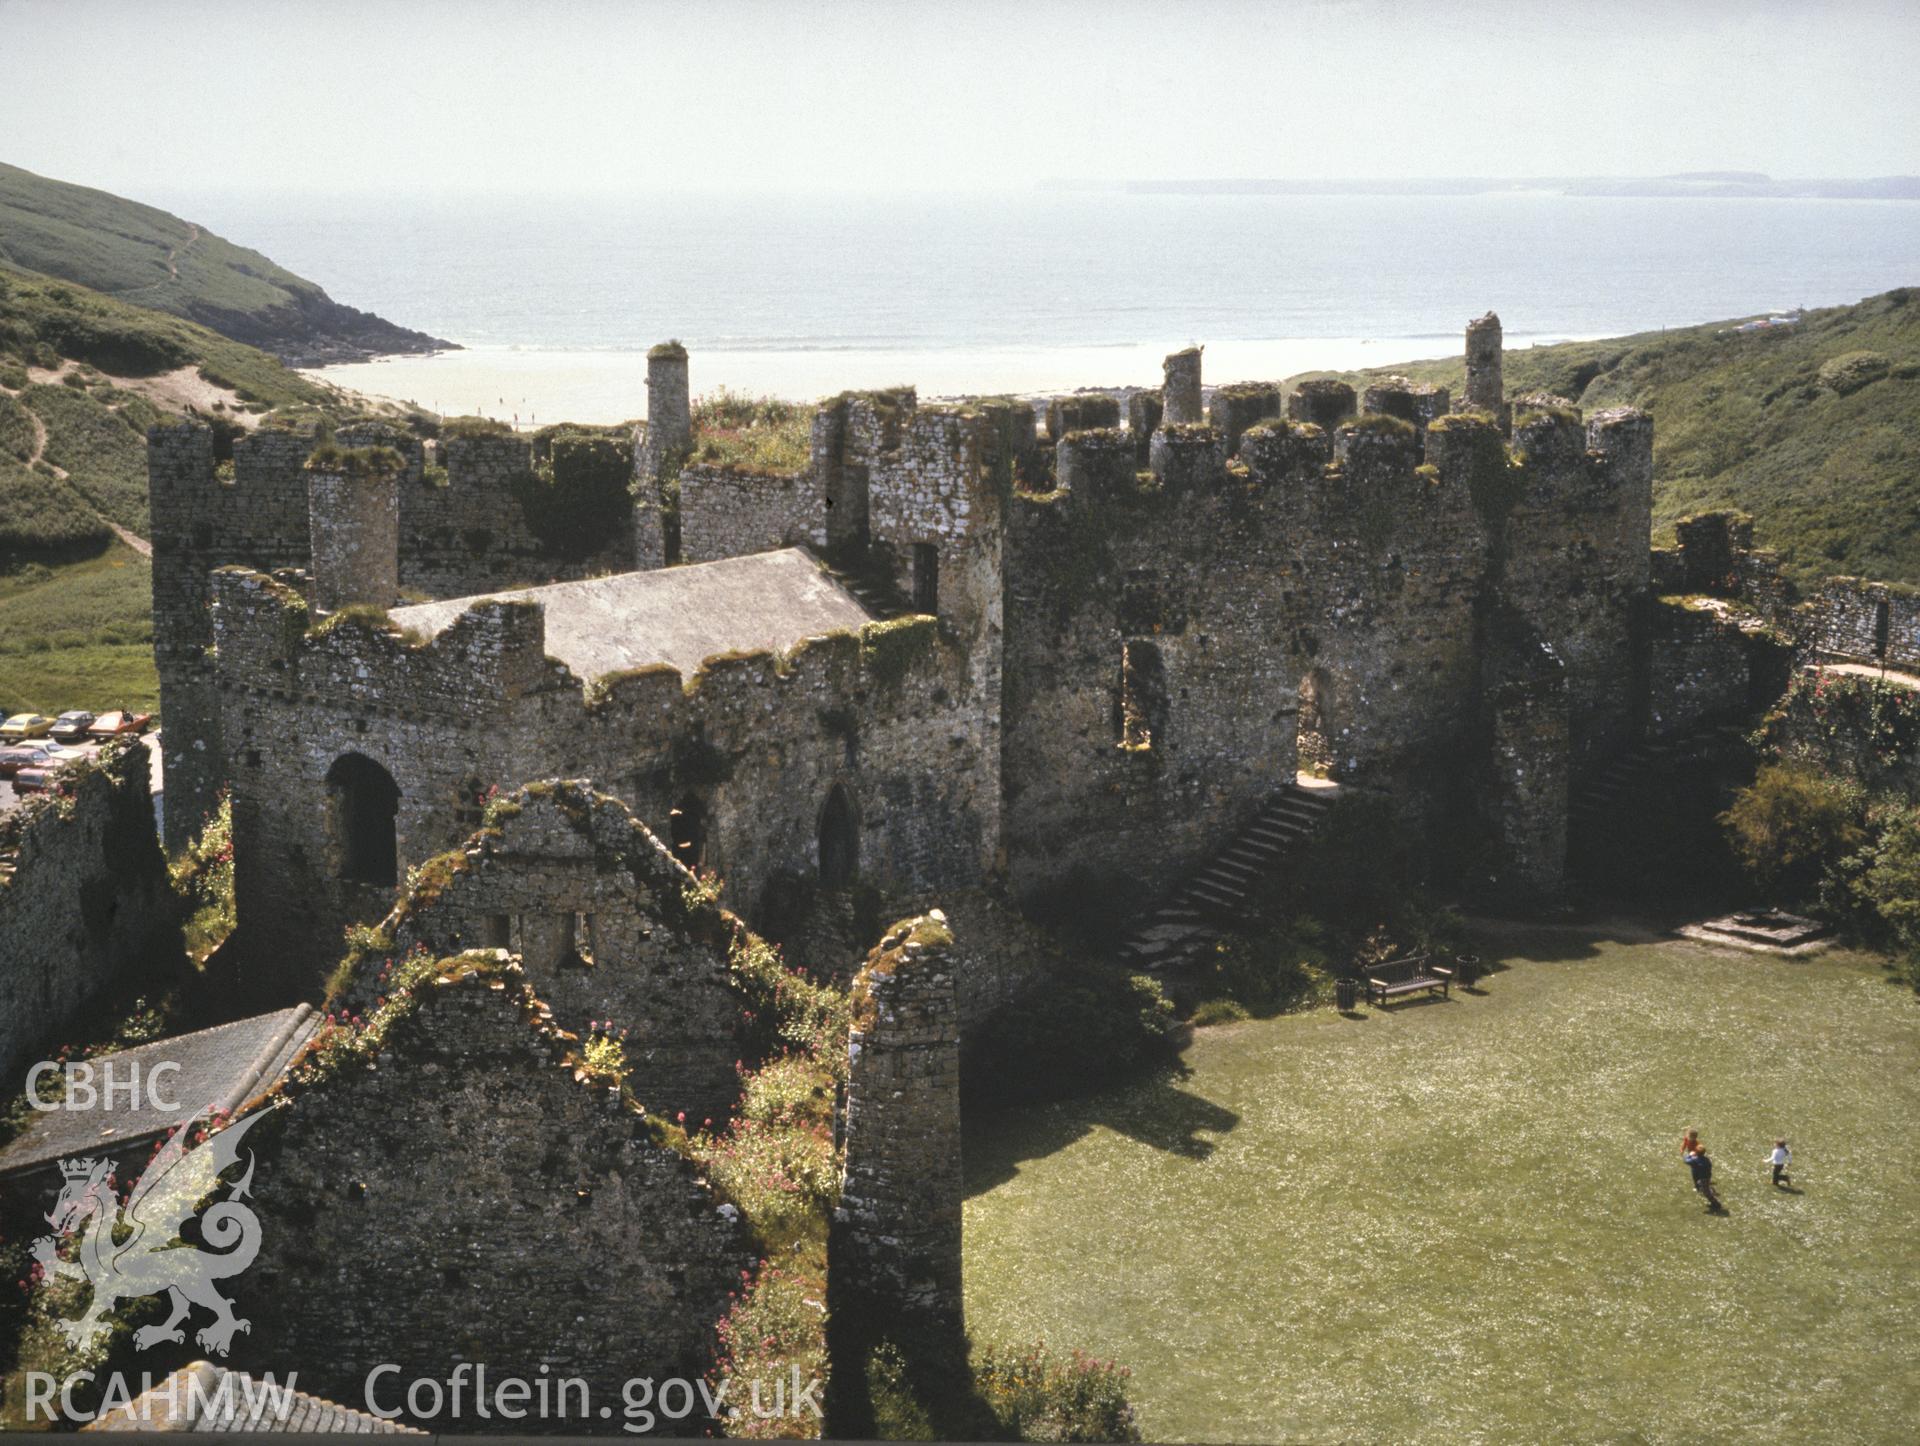 1 colour transparency showing view of Manorbier Castle, undated; collated by the former Central Office of Information.